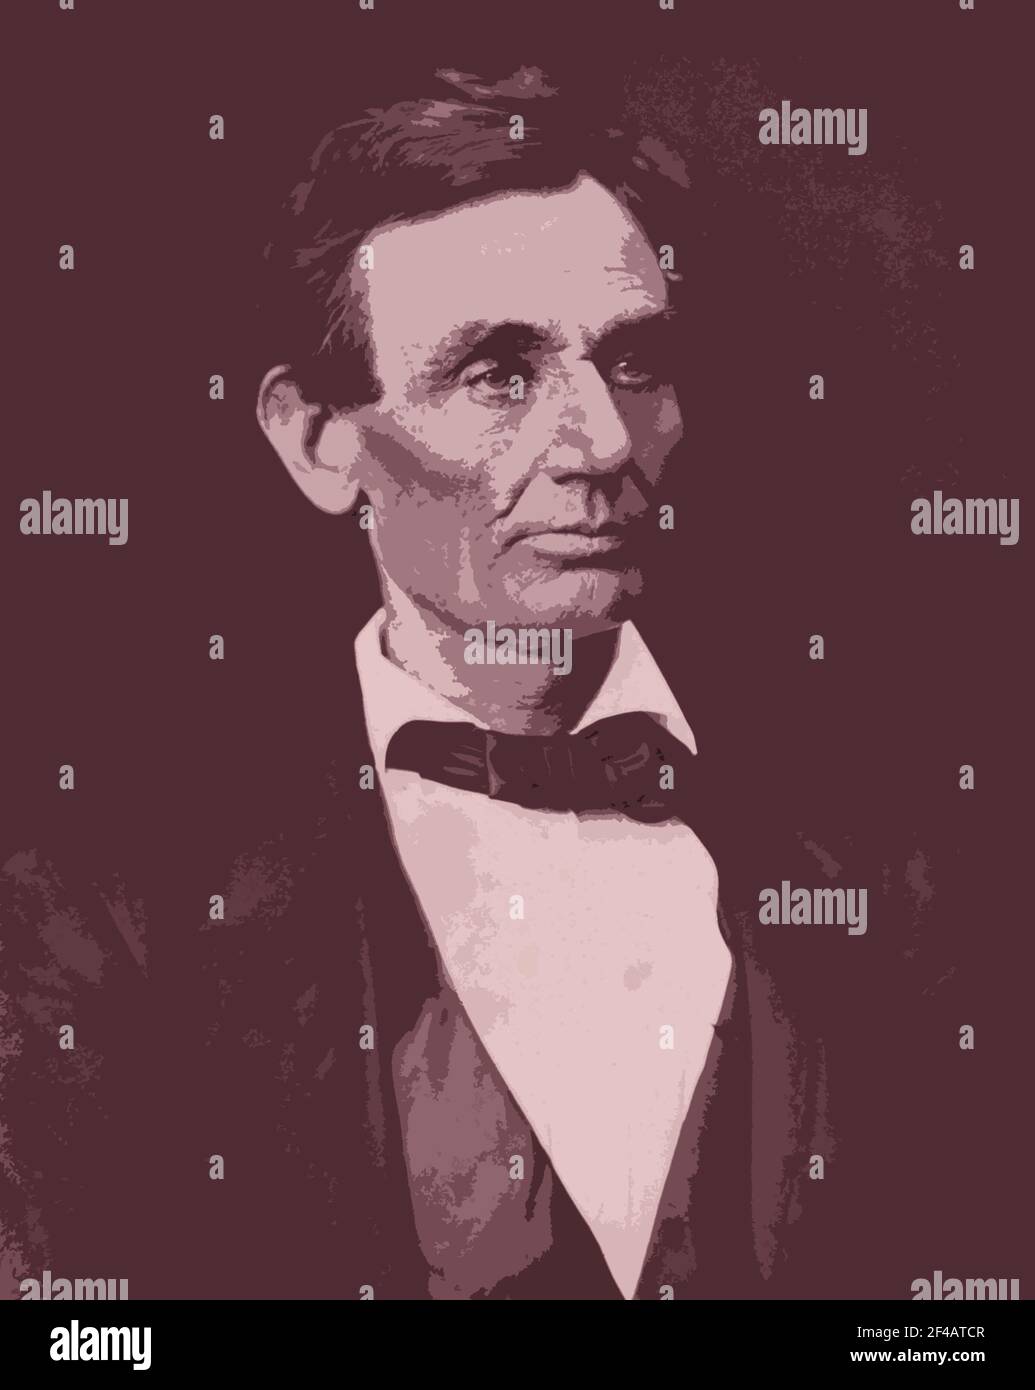 A 1832 photograph of former U.S. President Abraham Lincoln altered with a Photoshop special effects filter. Stock Photo